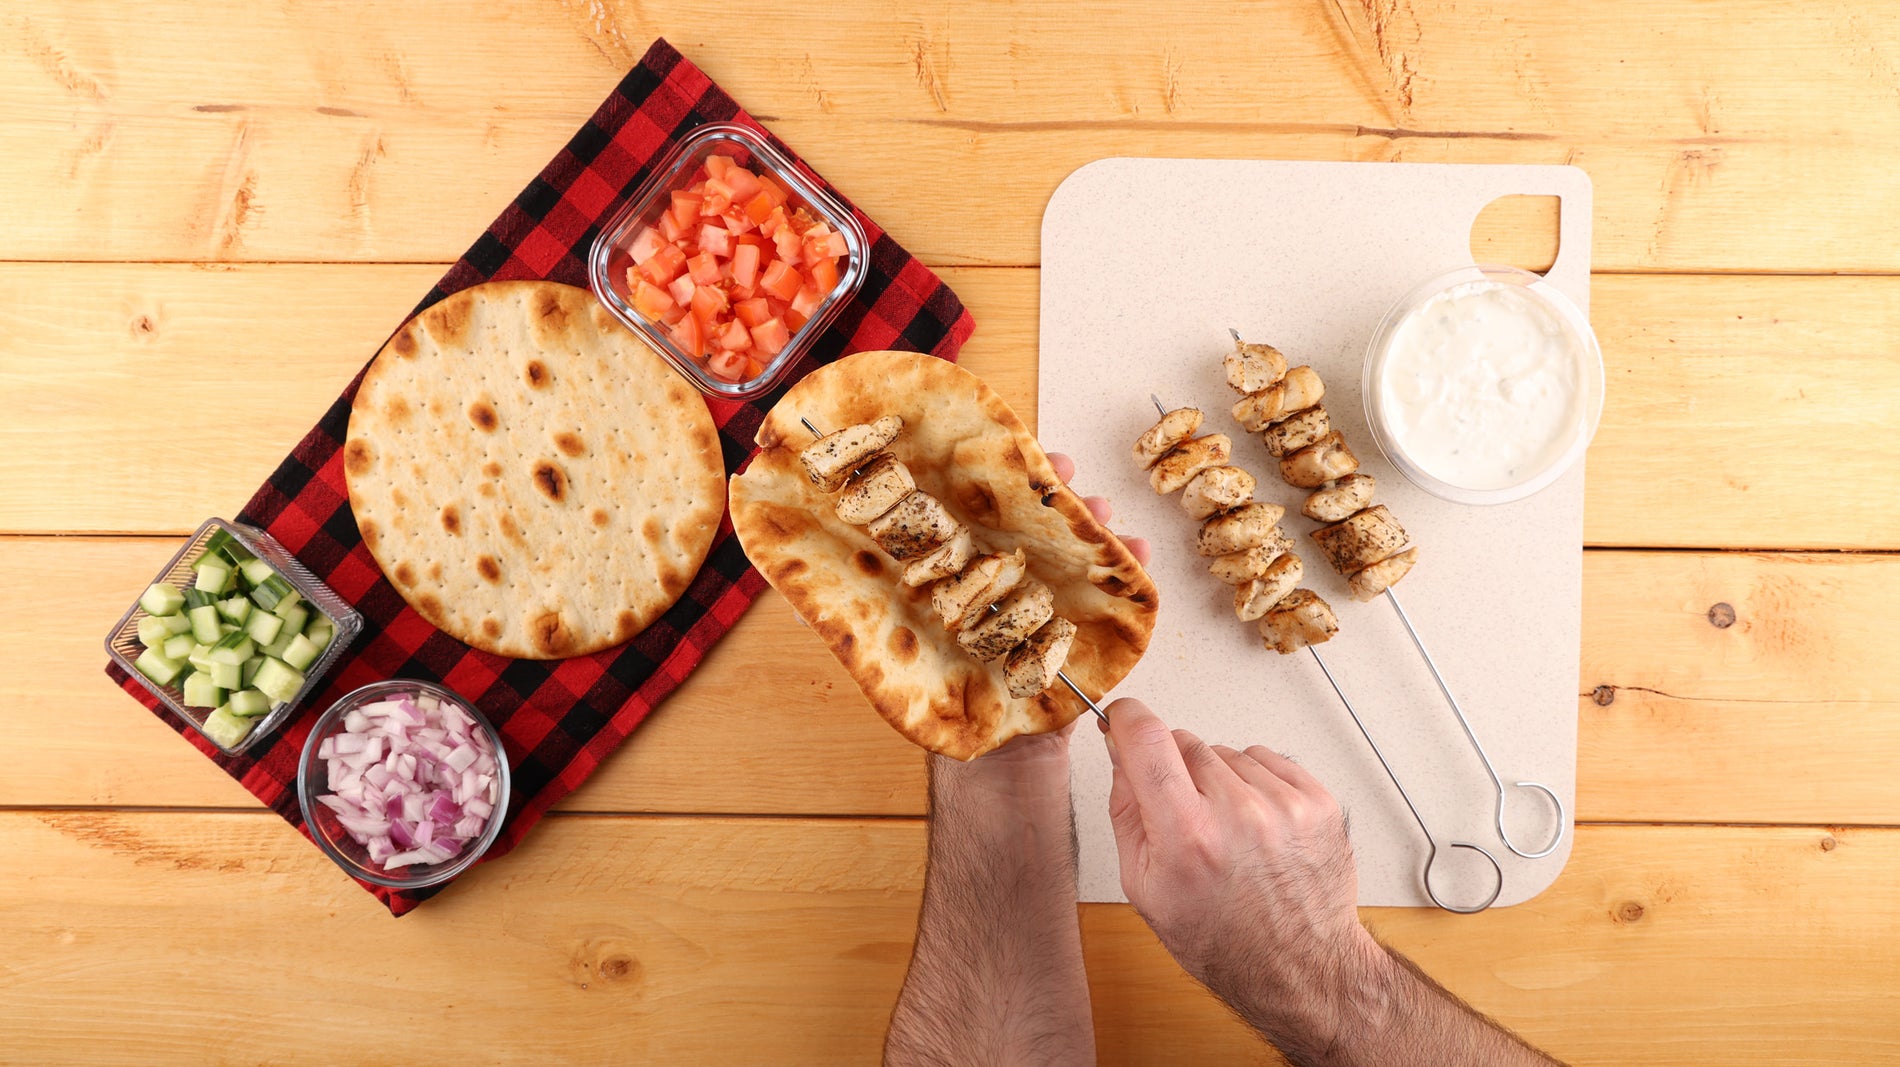 Adding chicken to naan bread from the skewer